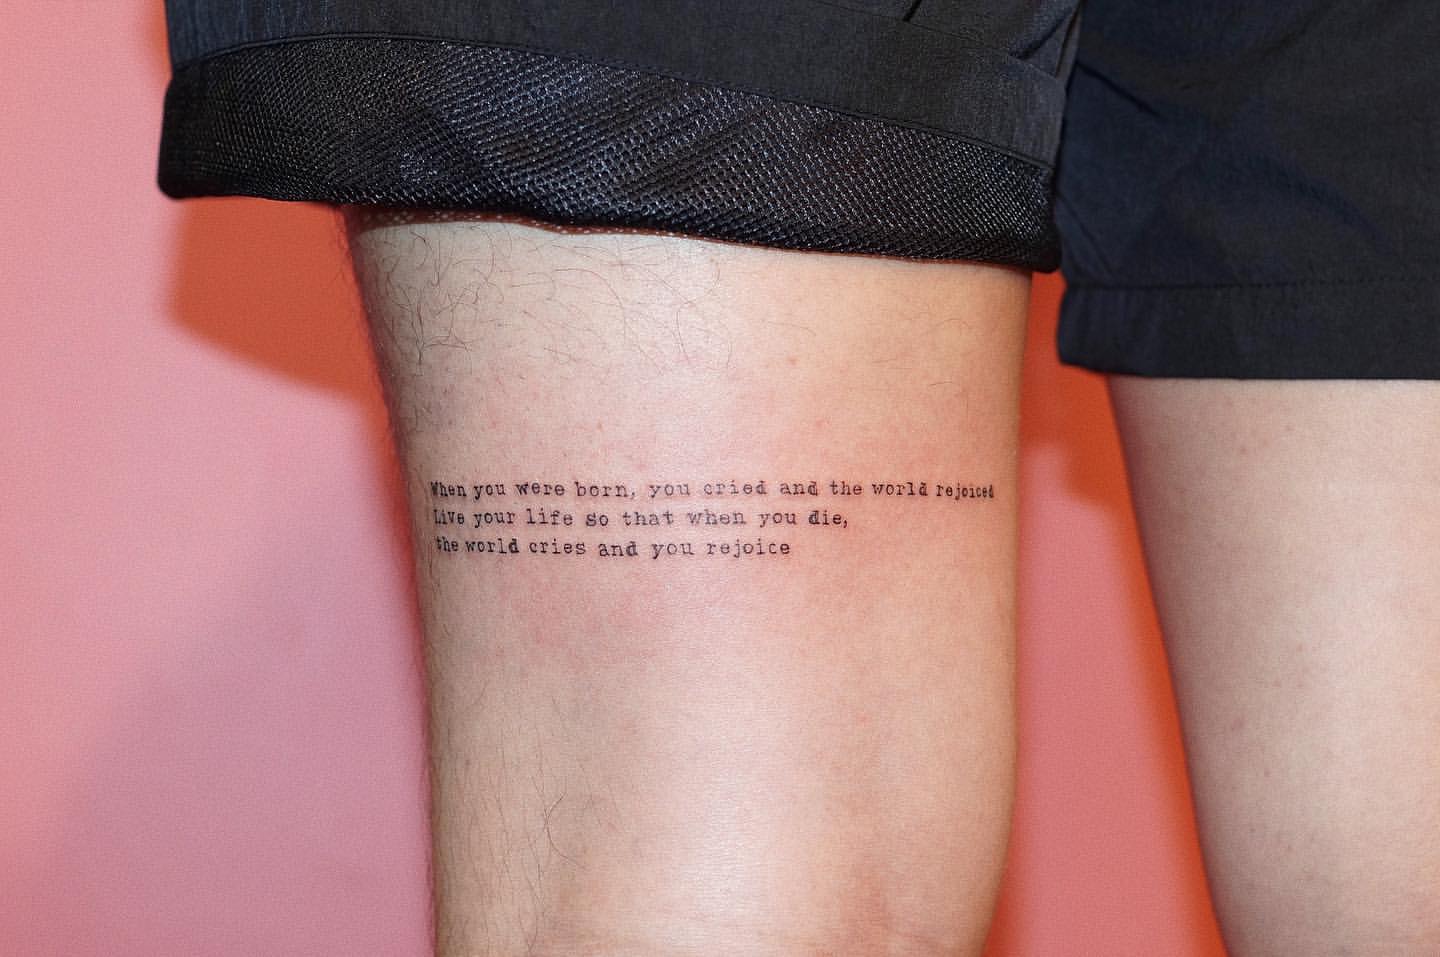 Quote Tattoos for Men 2